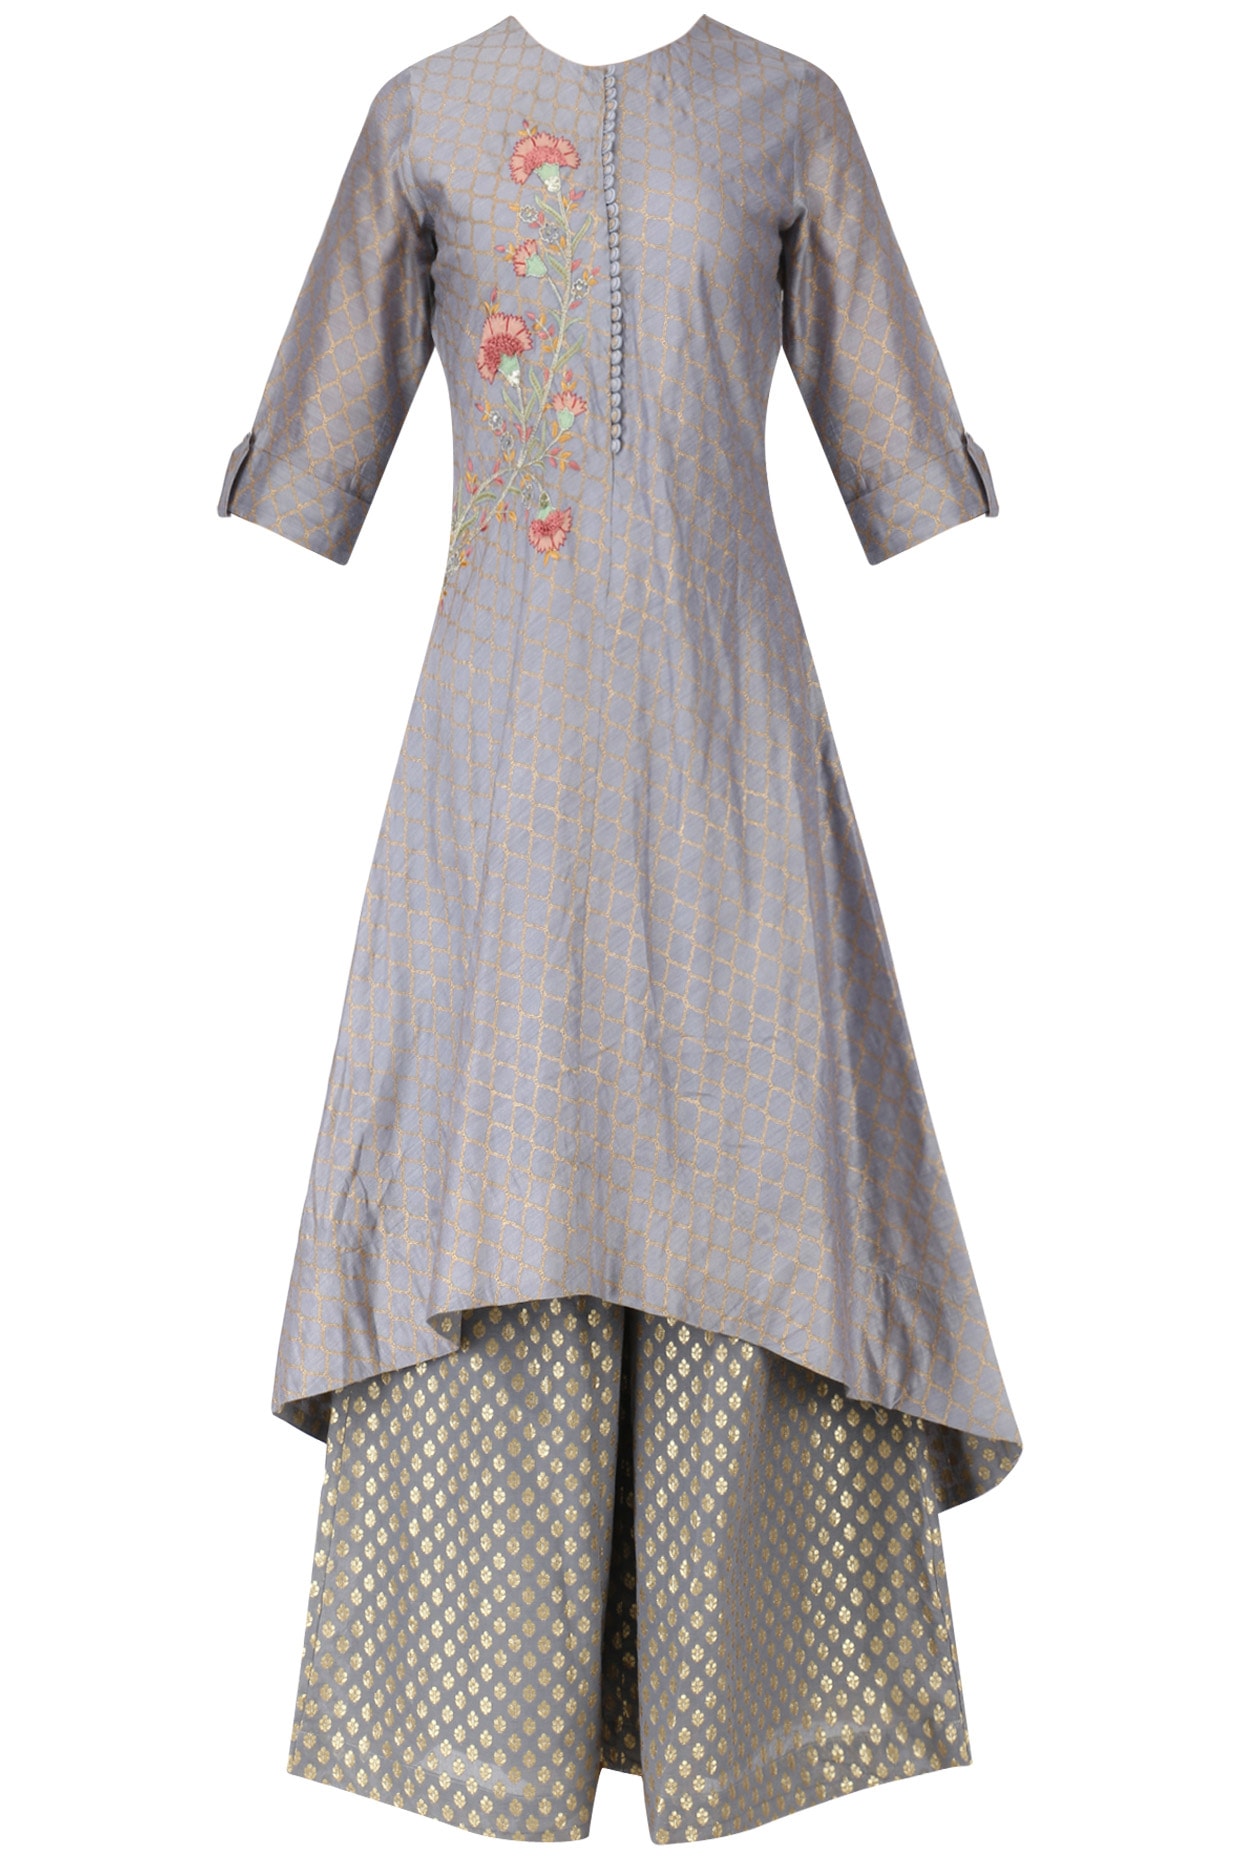 Buy Oooh Lady Fashion Georgette Peach Up Down Dress Online  499 from  ShopClues